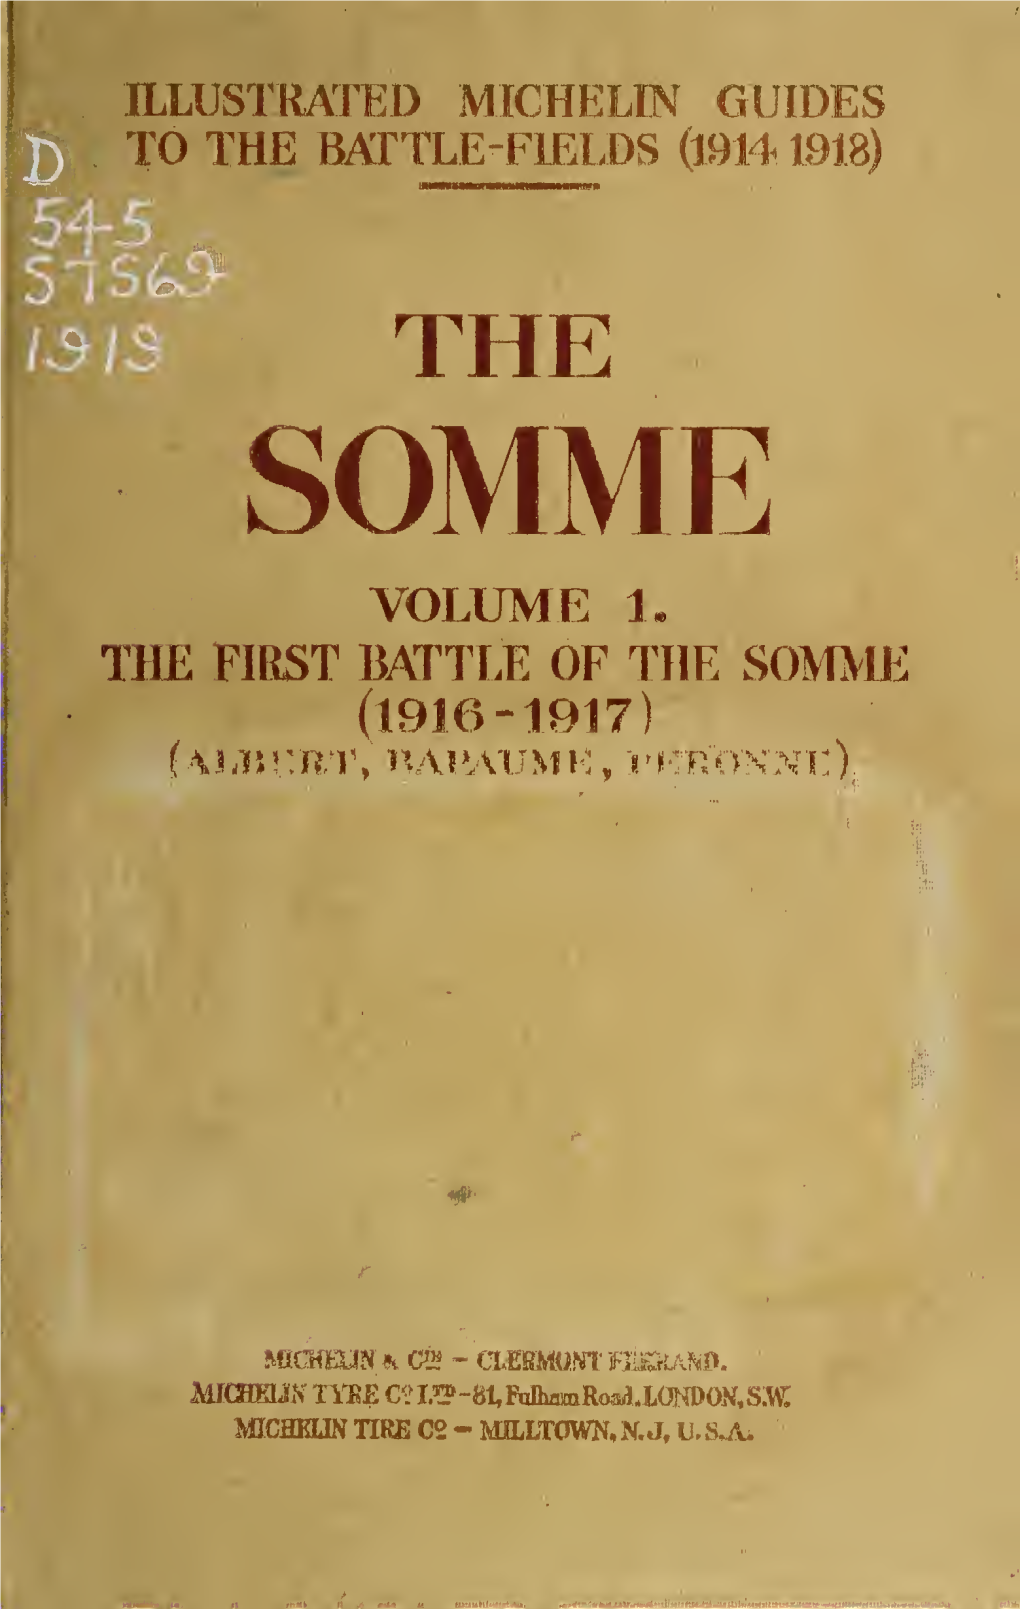 The Somme Volume 1